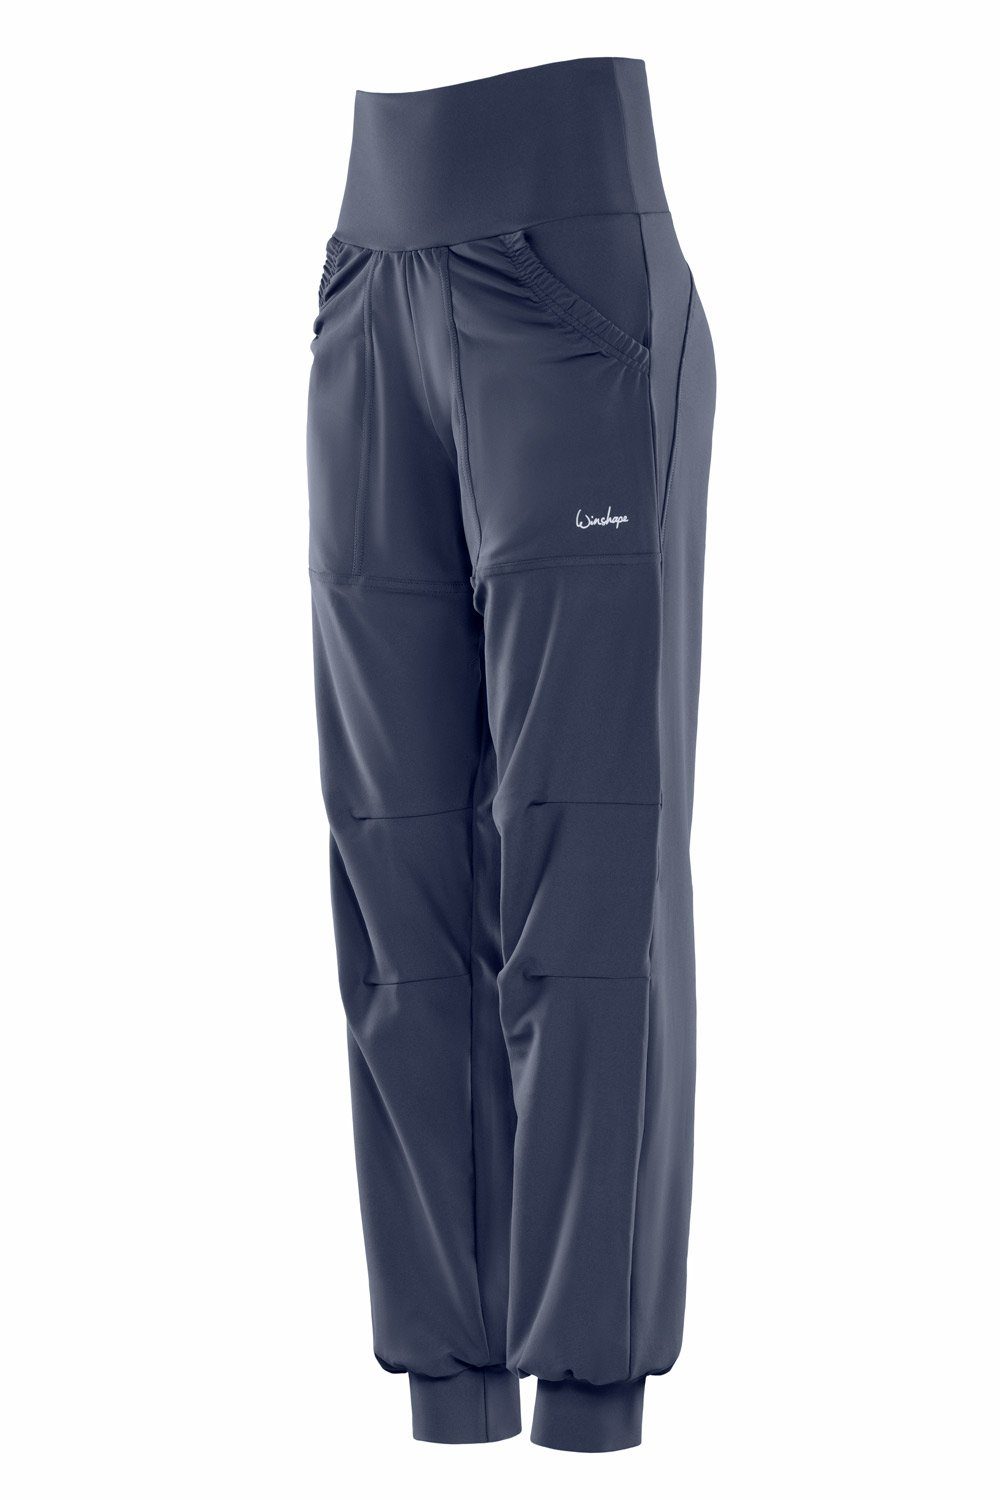 Winshape Sporthose Waist anthrazit Leisure Time Functional Comfort LEI101C Trousers High